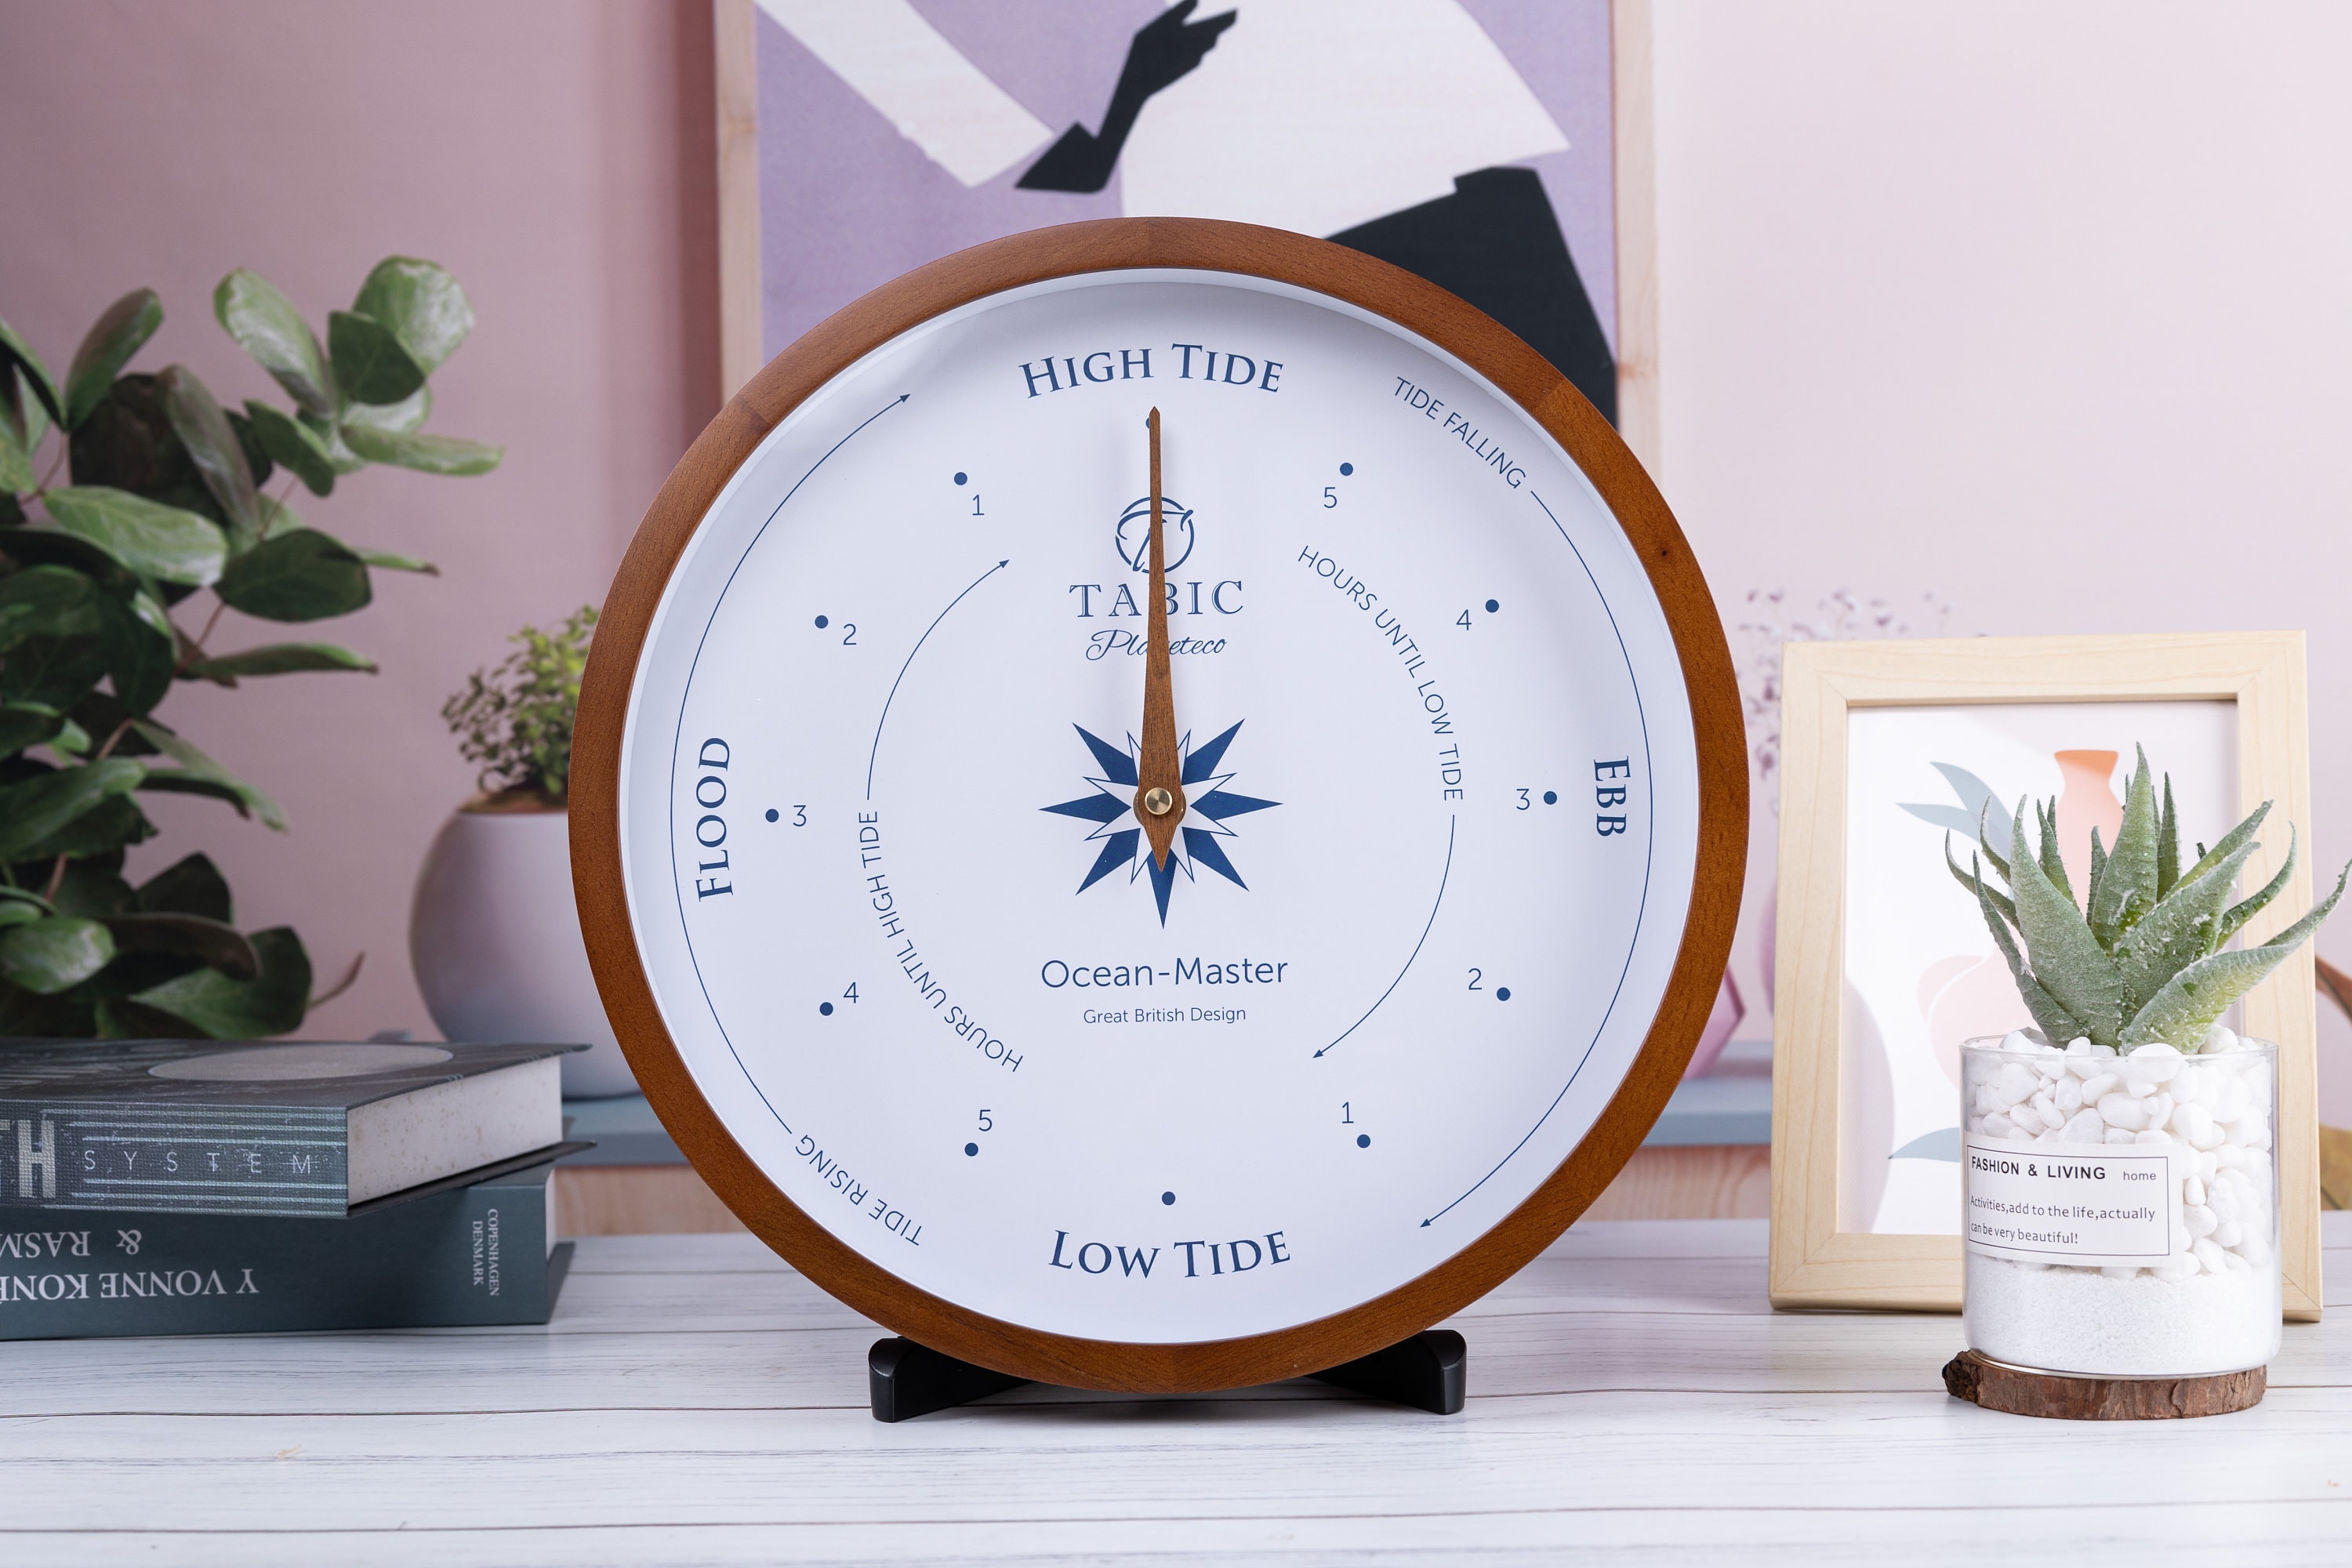  Tabic Traditional Tide Clock - Heavy Lacquered Brass